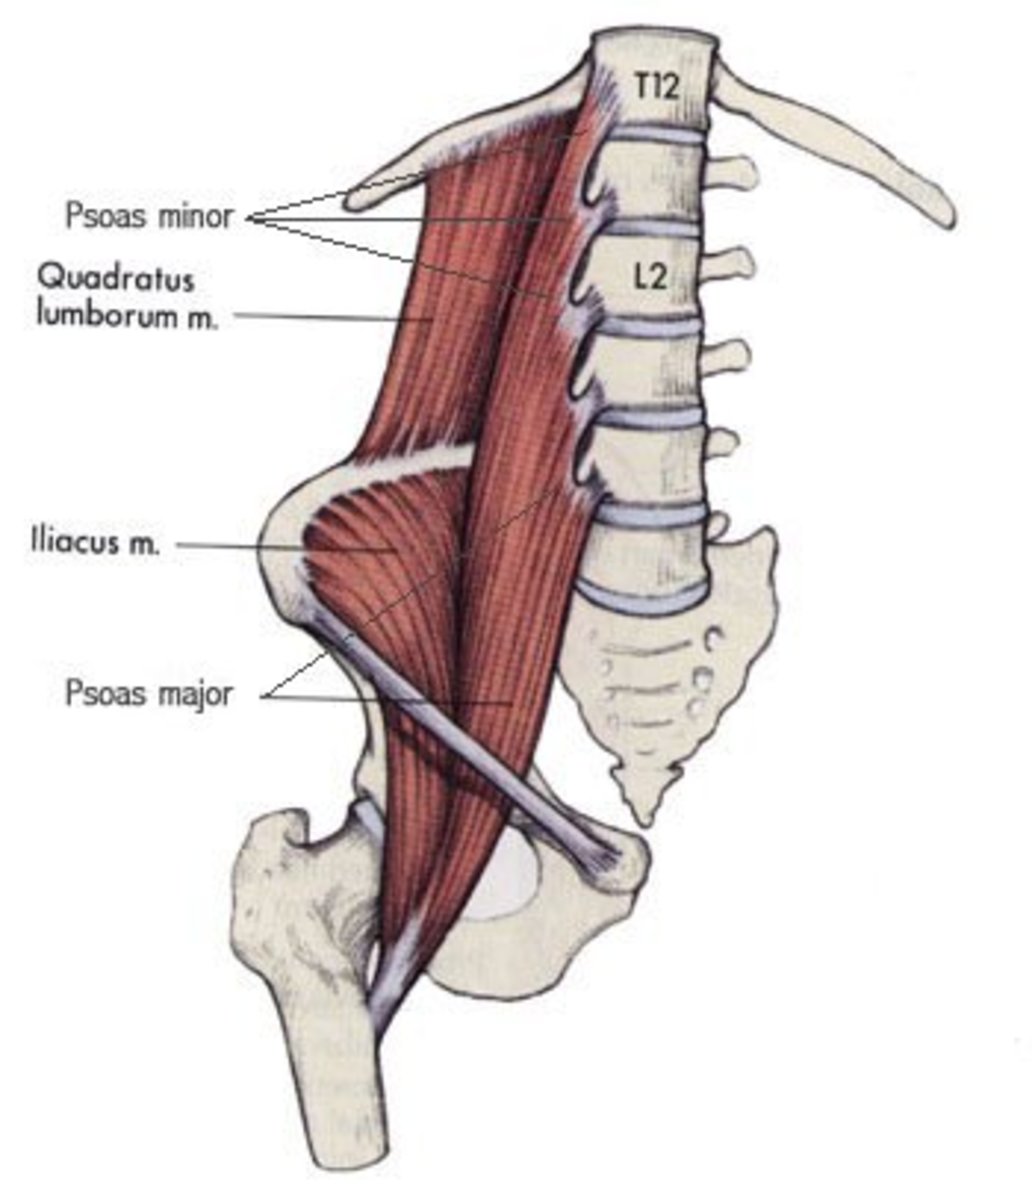 The Kidney lies along the borders of the Psoas Muscles and are therefore obliquely placed.